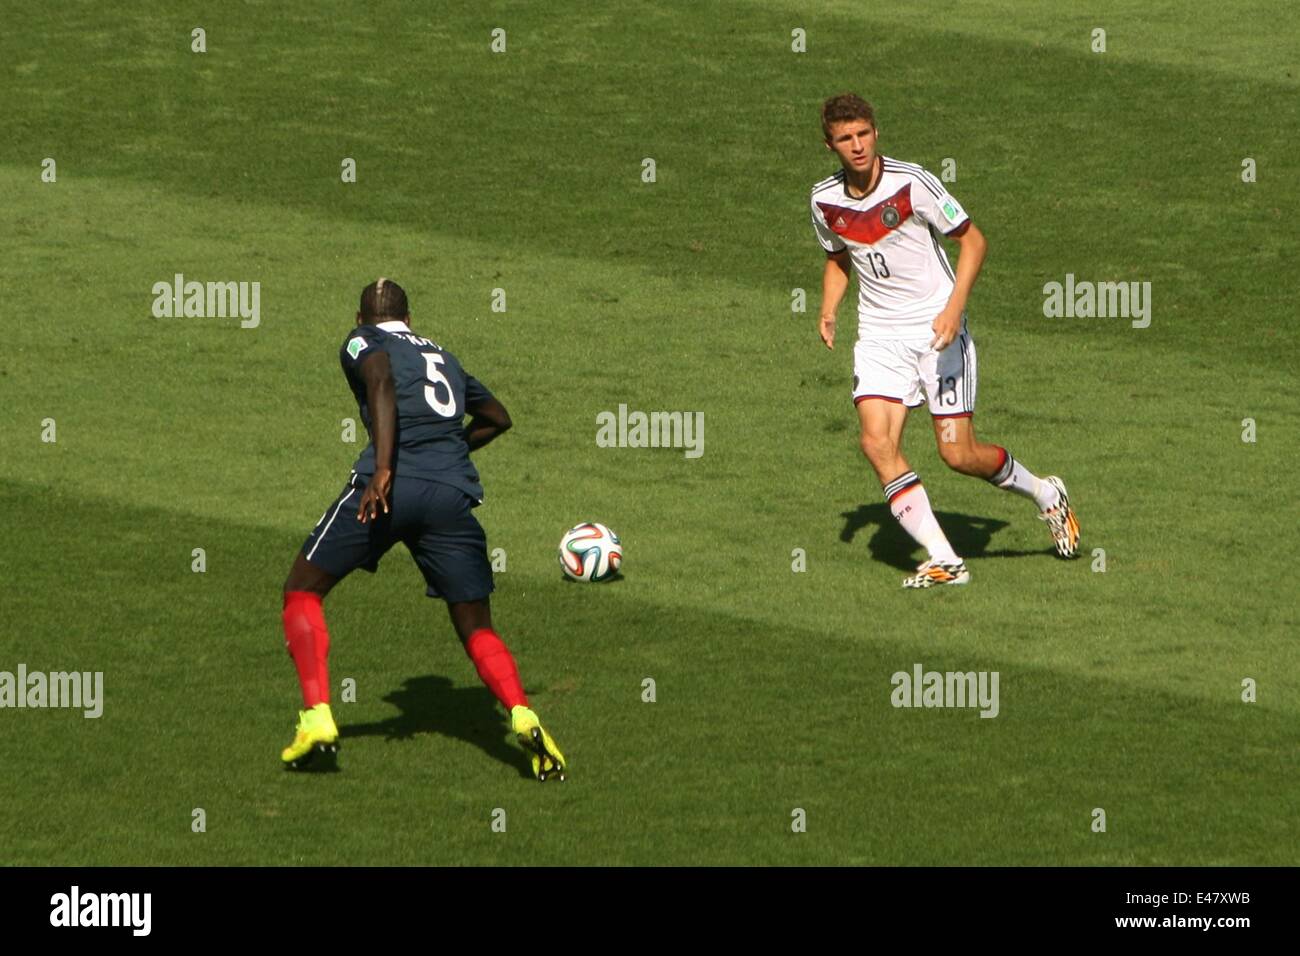 Rio de Janeiro, Brazil. 04th July, 2014. 2014 FIFA World Cup Brazil. Mamadou Sakho (FRA) and Thomas Müller (GER) in the quarterfinals match France 0-1 Germany. Rio de Janeiro, Brazil, 4th July, 2014. Credit:  Maria Adelaide Silva/Alamy Live News Stock Photo